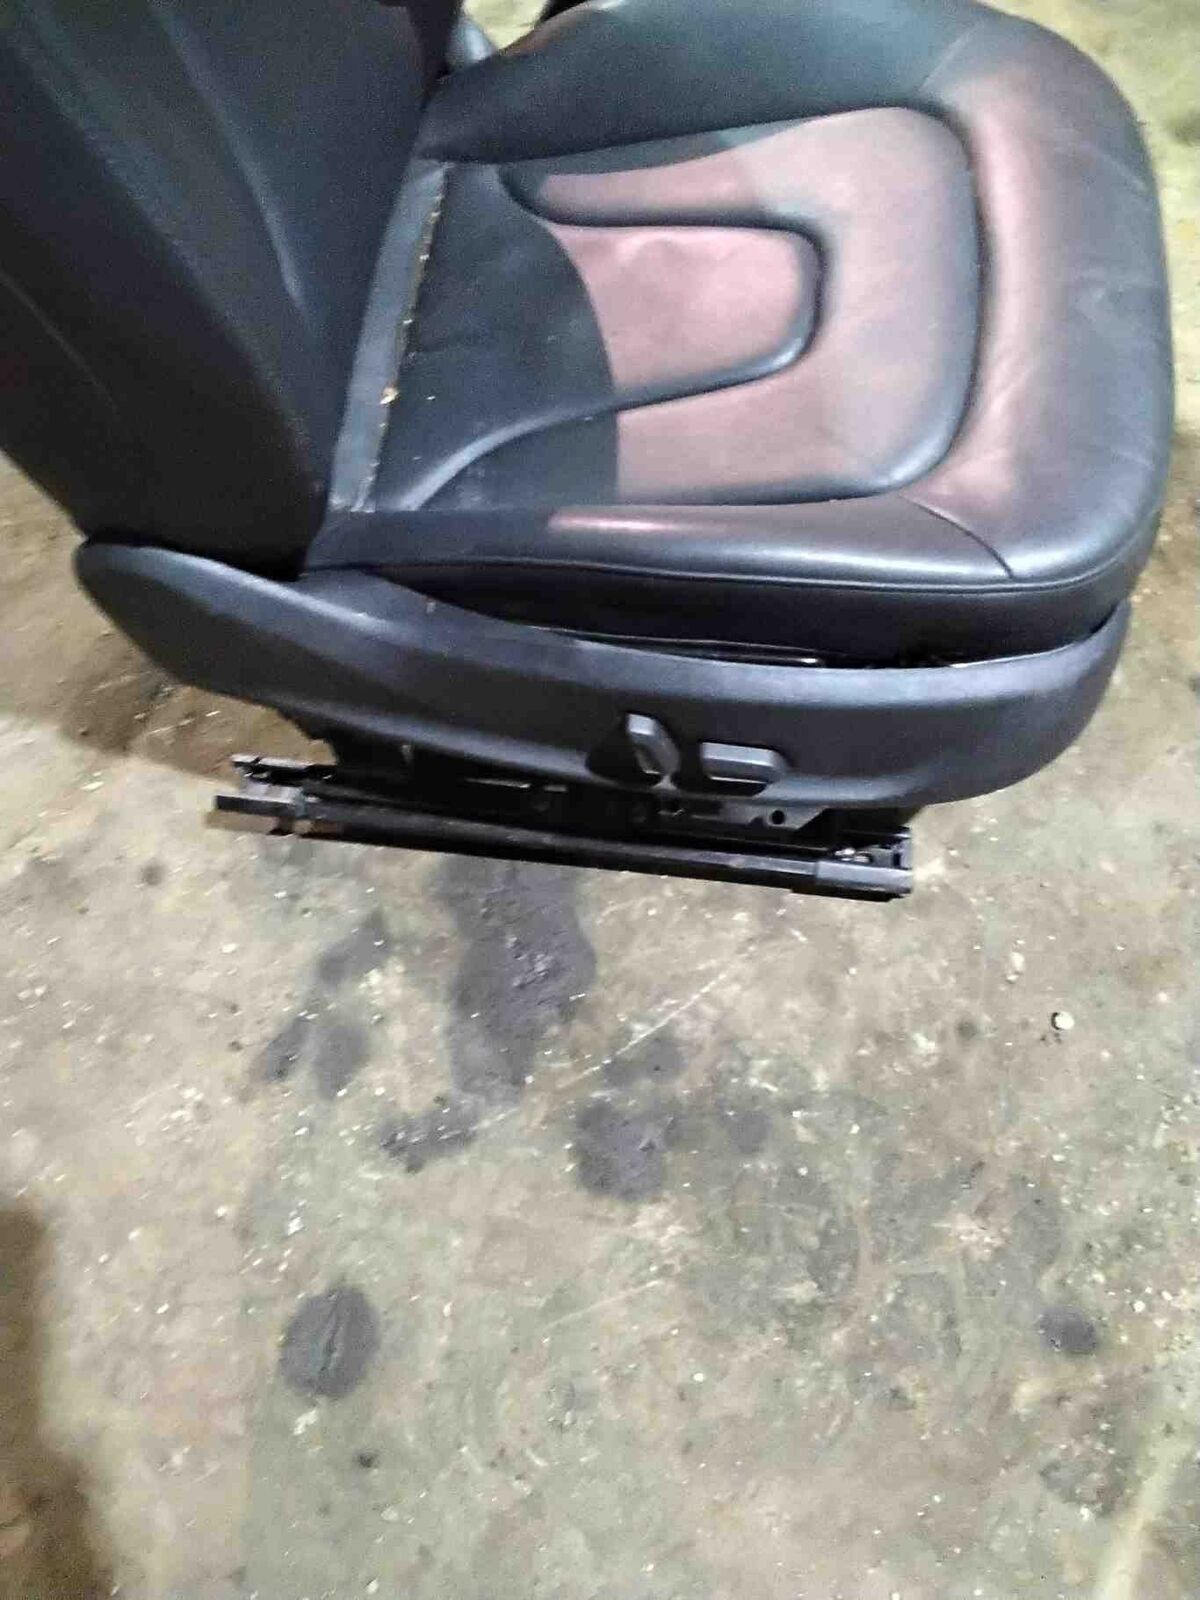 Front Seat AUDI A5 10 11 12 13